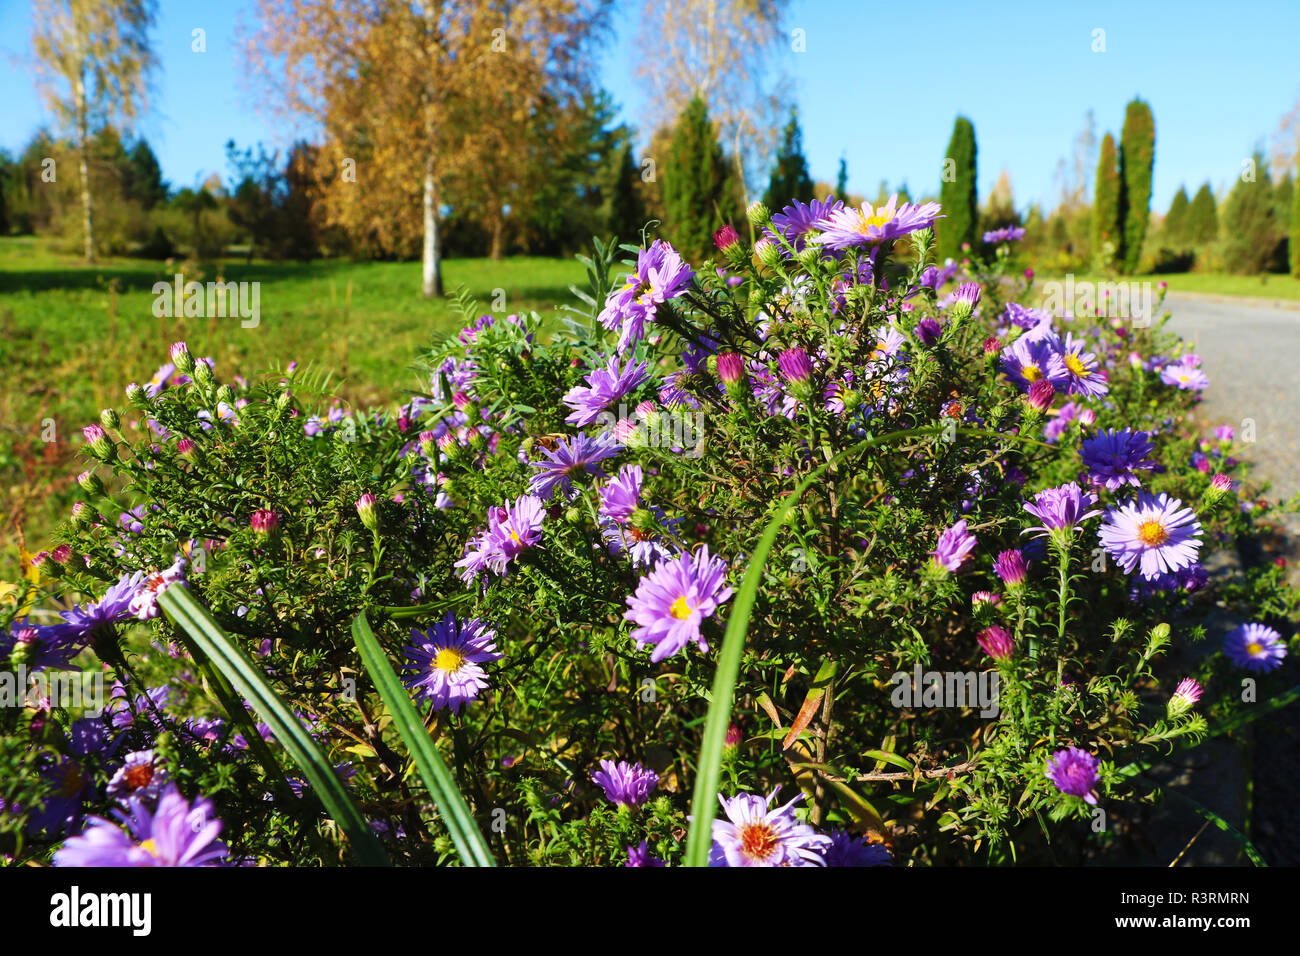 In the foreground flowers against the garden on a sunny day Stock Photo